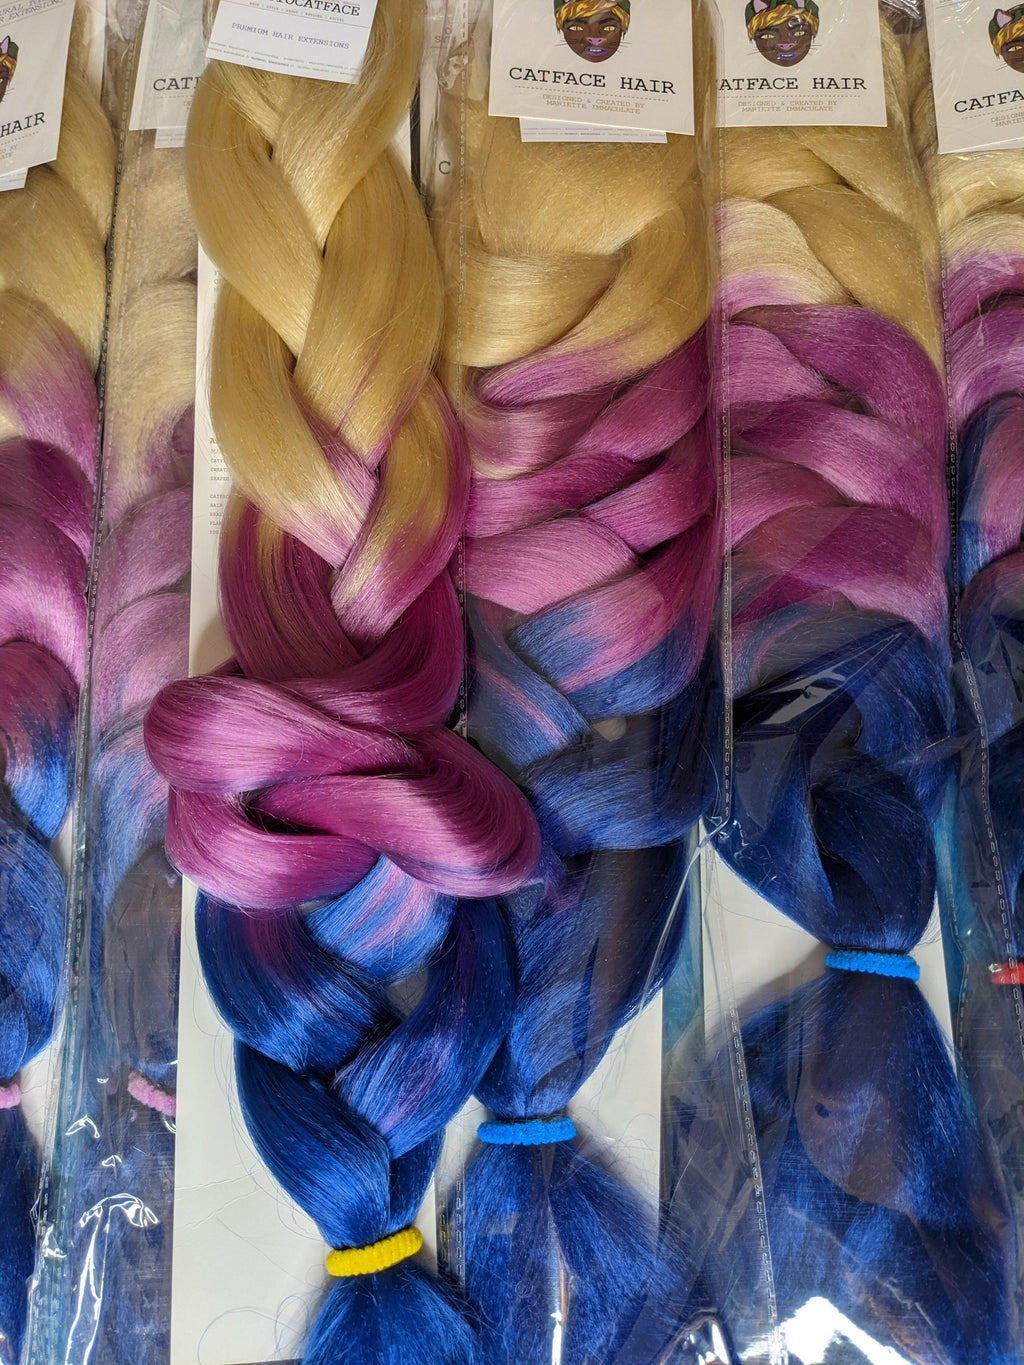 BLONDE & LAVENDER IVY OMBRE  - THREE TONE OMBRE 34 INCHES 165g CATFACE HAIR.